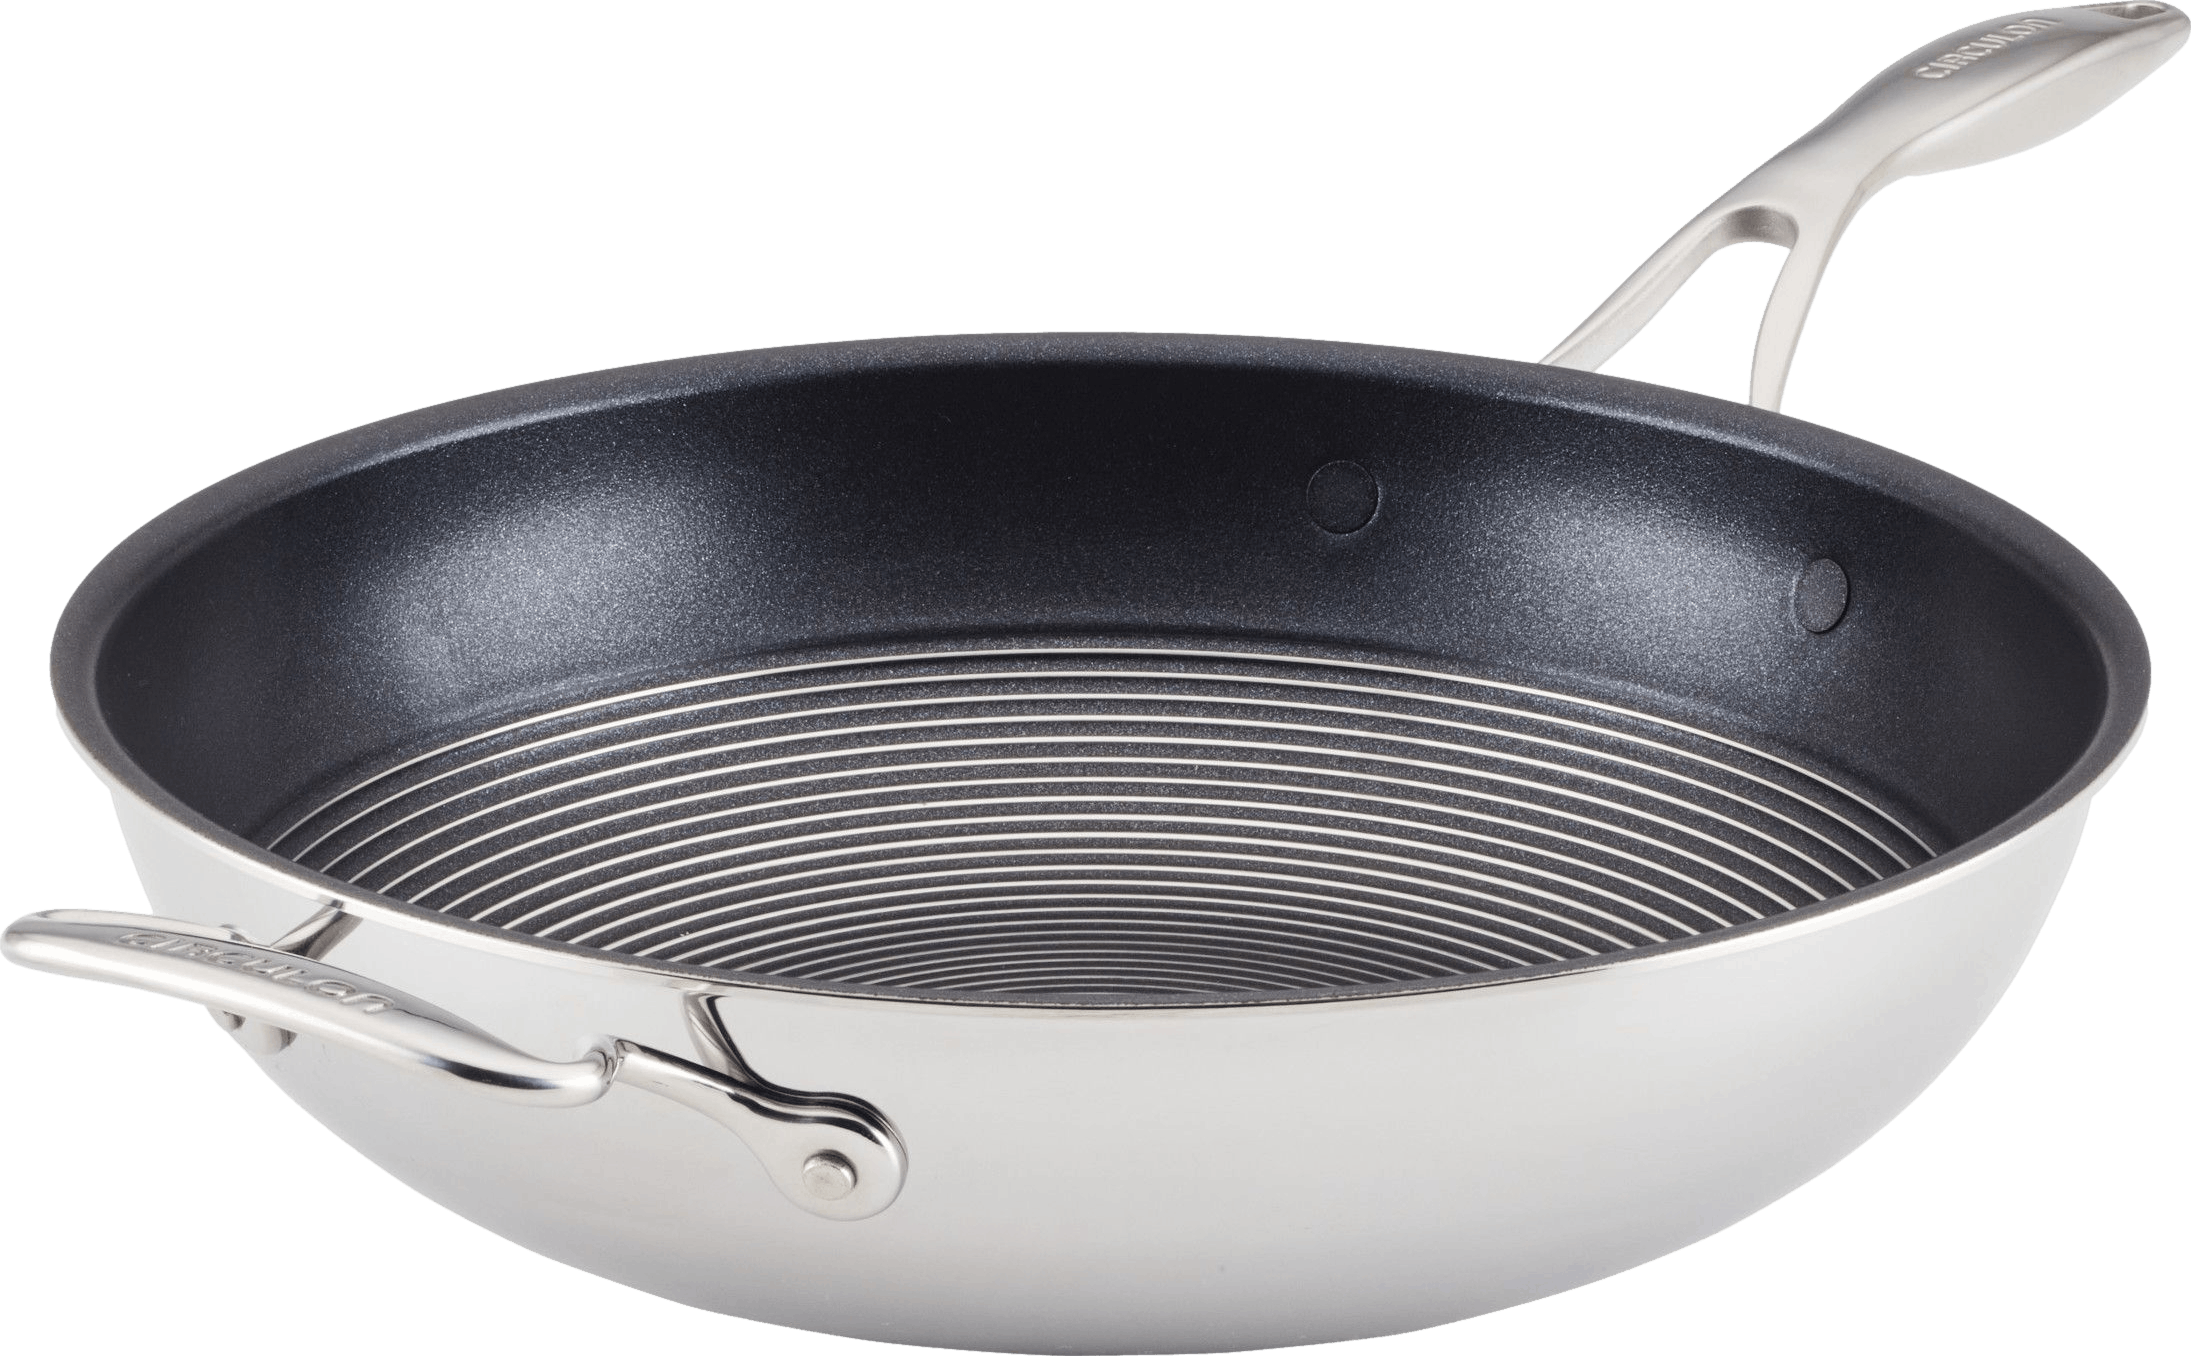 Circulon Clad Stainless Steel Induction Stir Fry Pan with Hybrid SteelShield and Nonstick Technology, 12.5-Inch, Silver